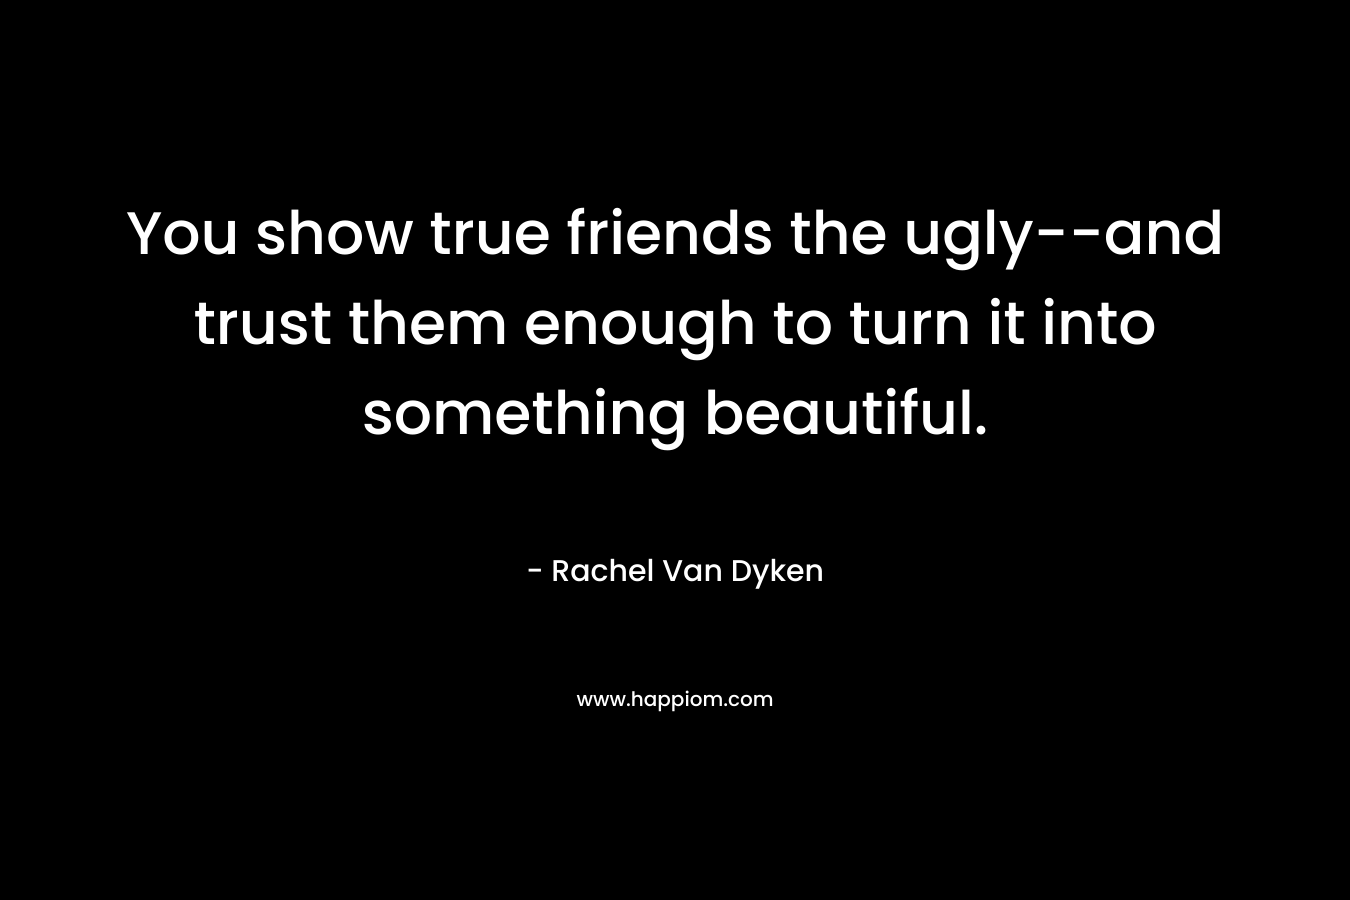 You show true friends the ugly--and trust them enough to turn it into something beautiful.